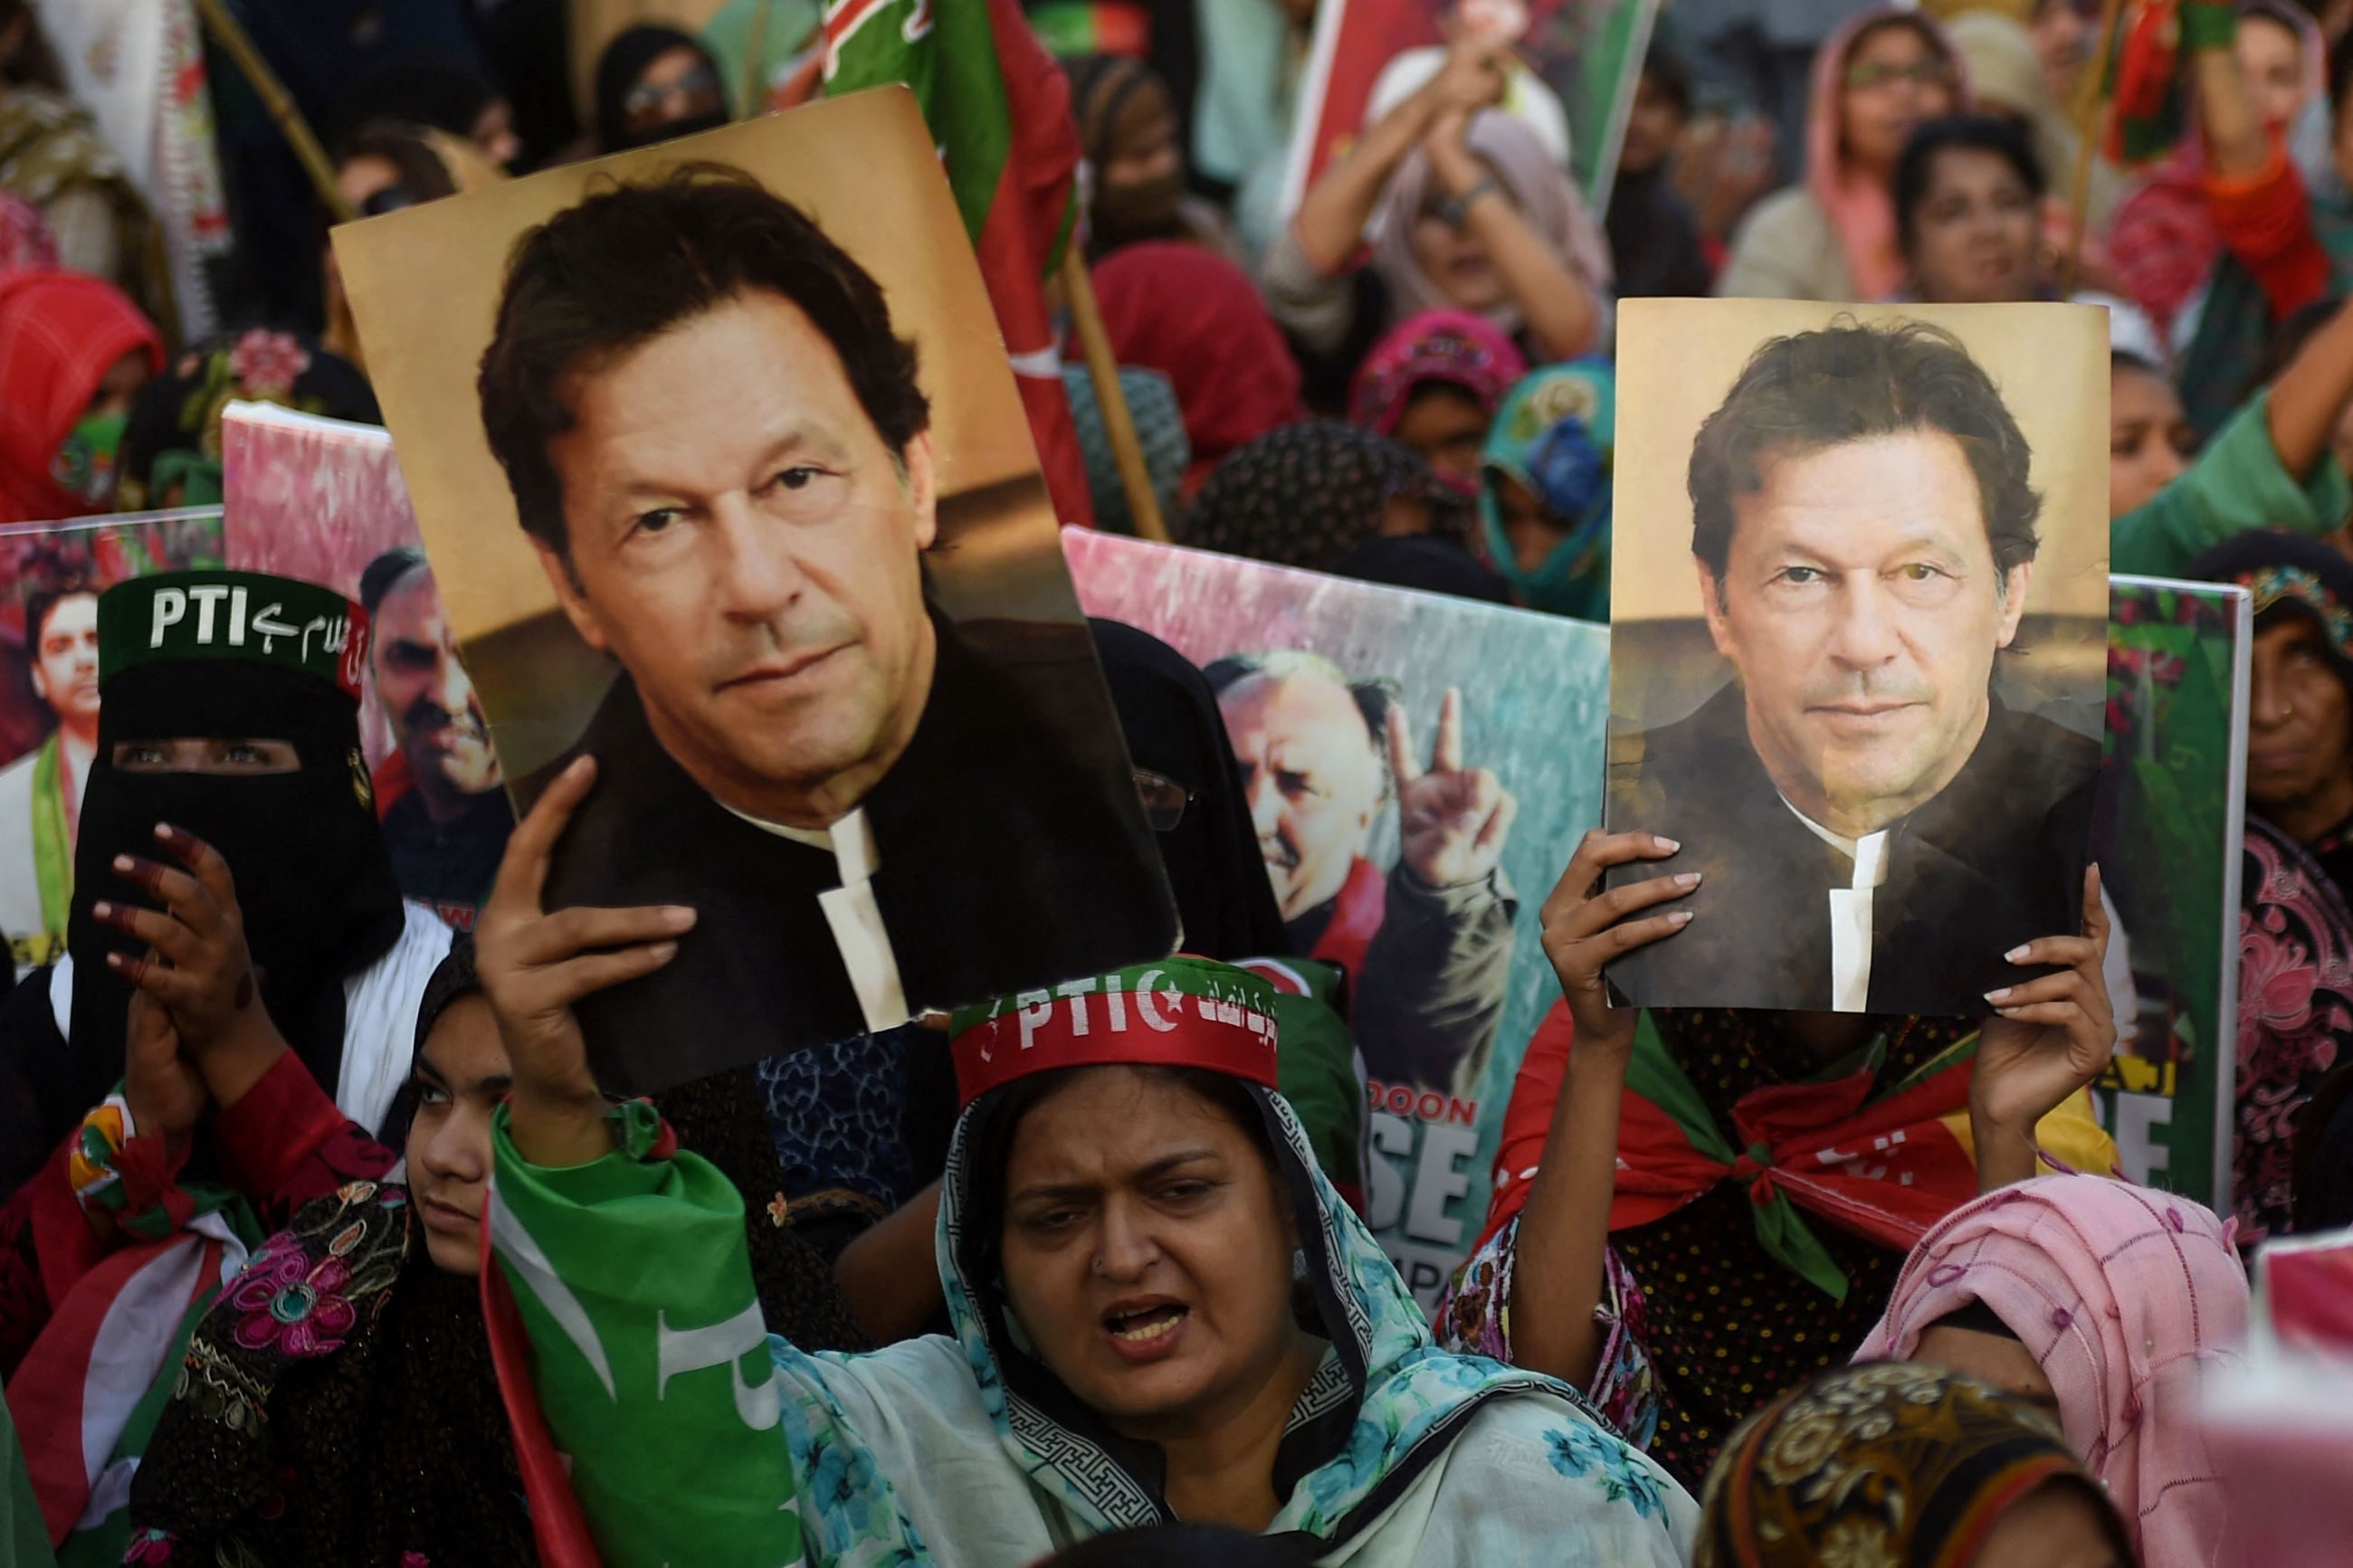 Supporters of Pakistan's former prime minister Imran Khan, carry placards displaying a portrait of Khan during a protest in Karachi on March 19, 2023, demanding release of arrested party workers in recent police clashes (AFP)